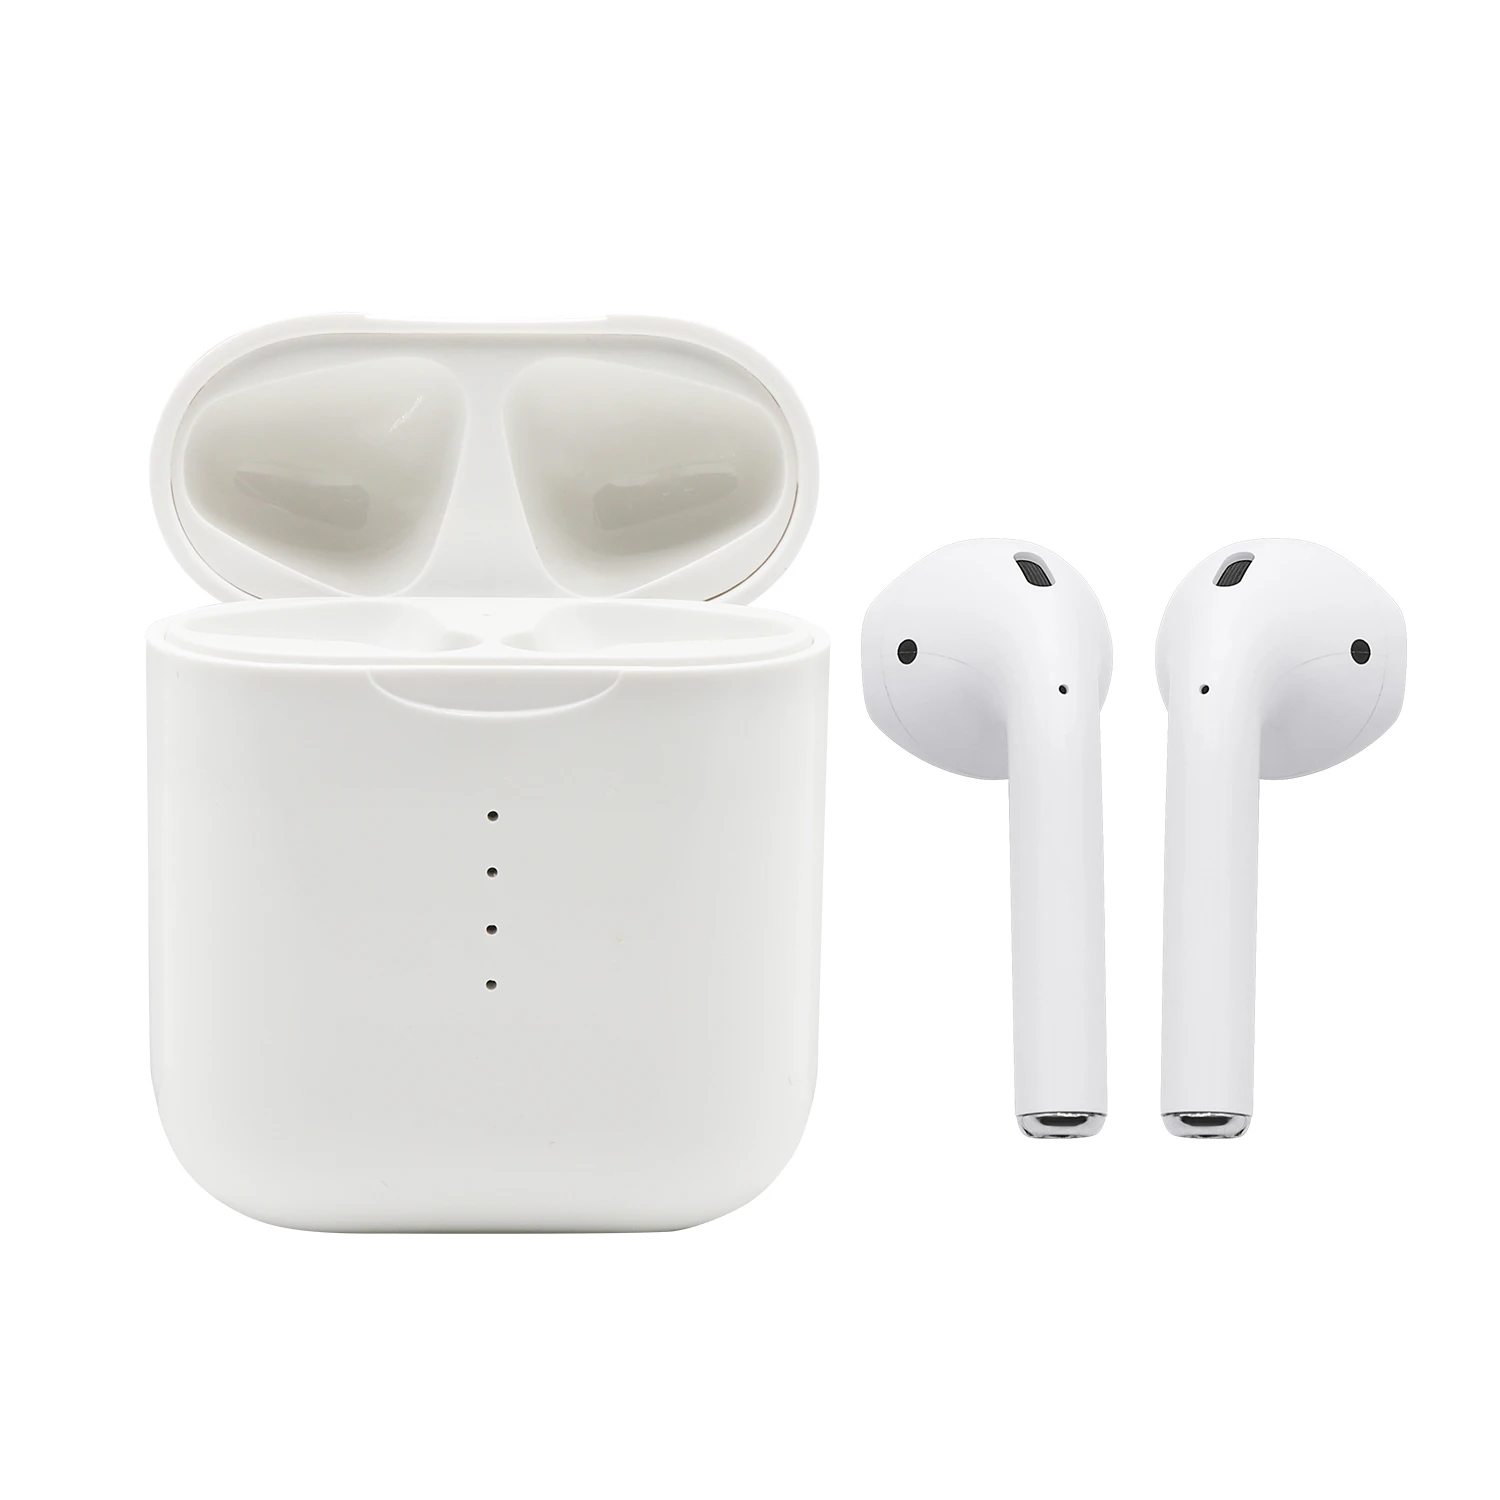 

new technology TWS i10 bluetooth wireless stereo earbud headset with mic i7s i11 i12 tws true wireless earphones for air pods, N/a